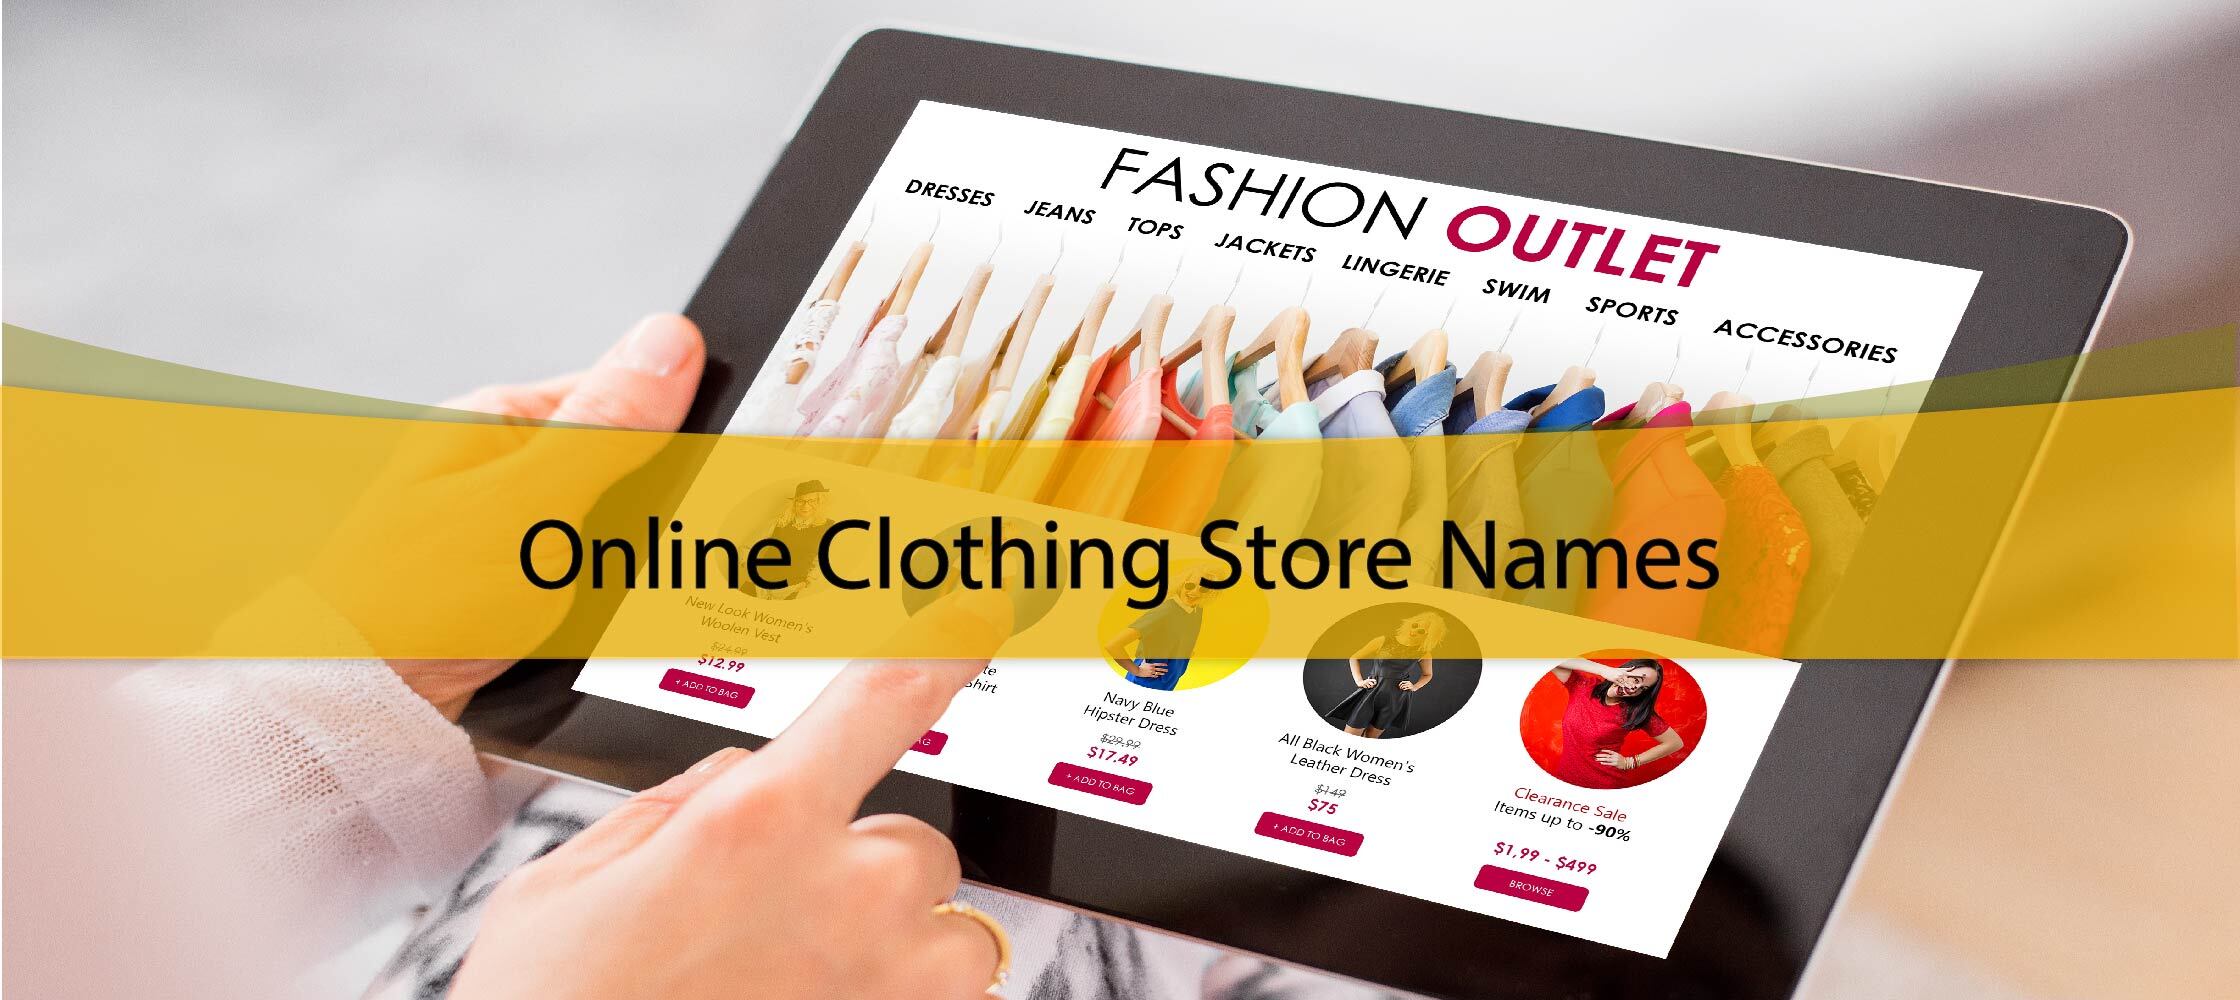 Online Clothing Store Names